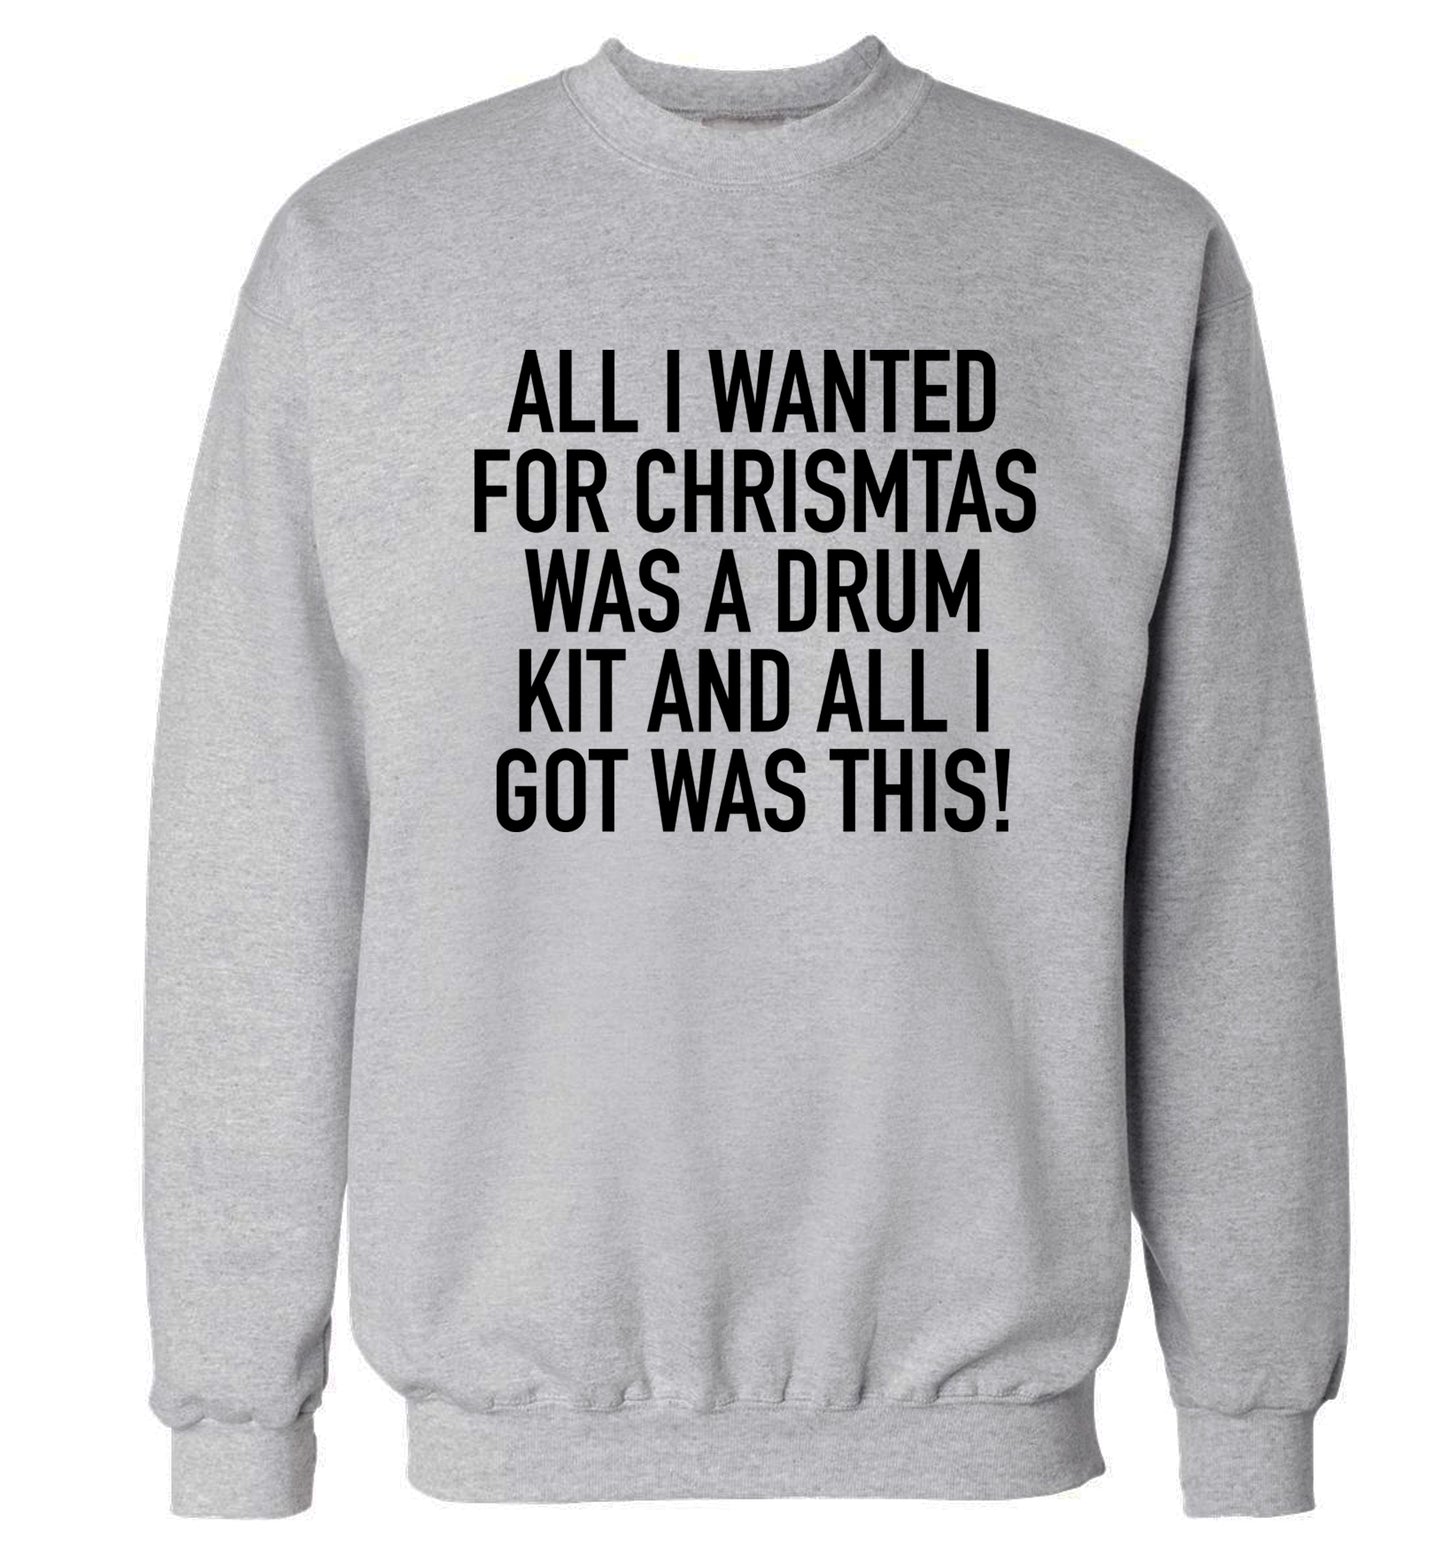 All I wanted for Christmas was a drum kit and all I got was this! Adult's unisex grey Sweater 2XL